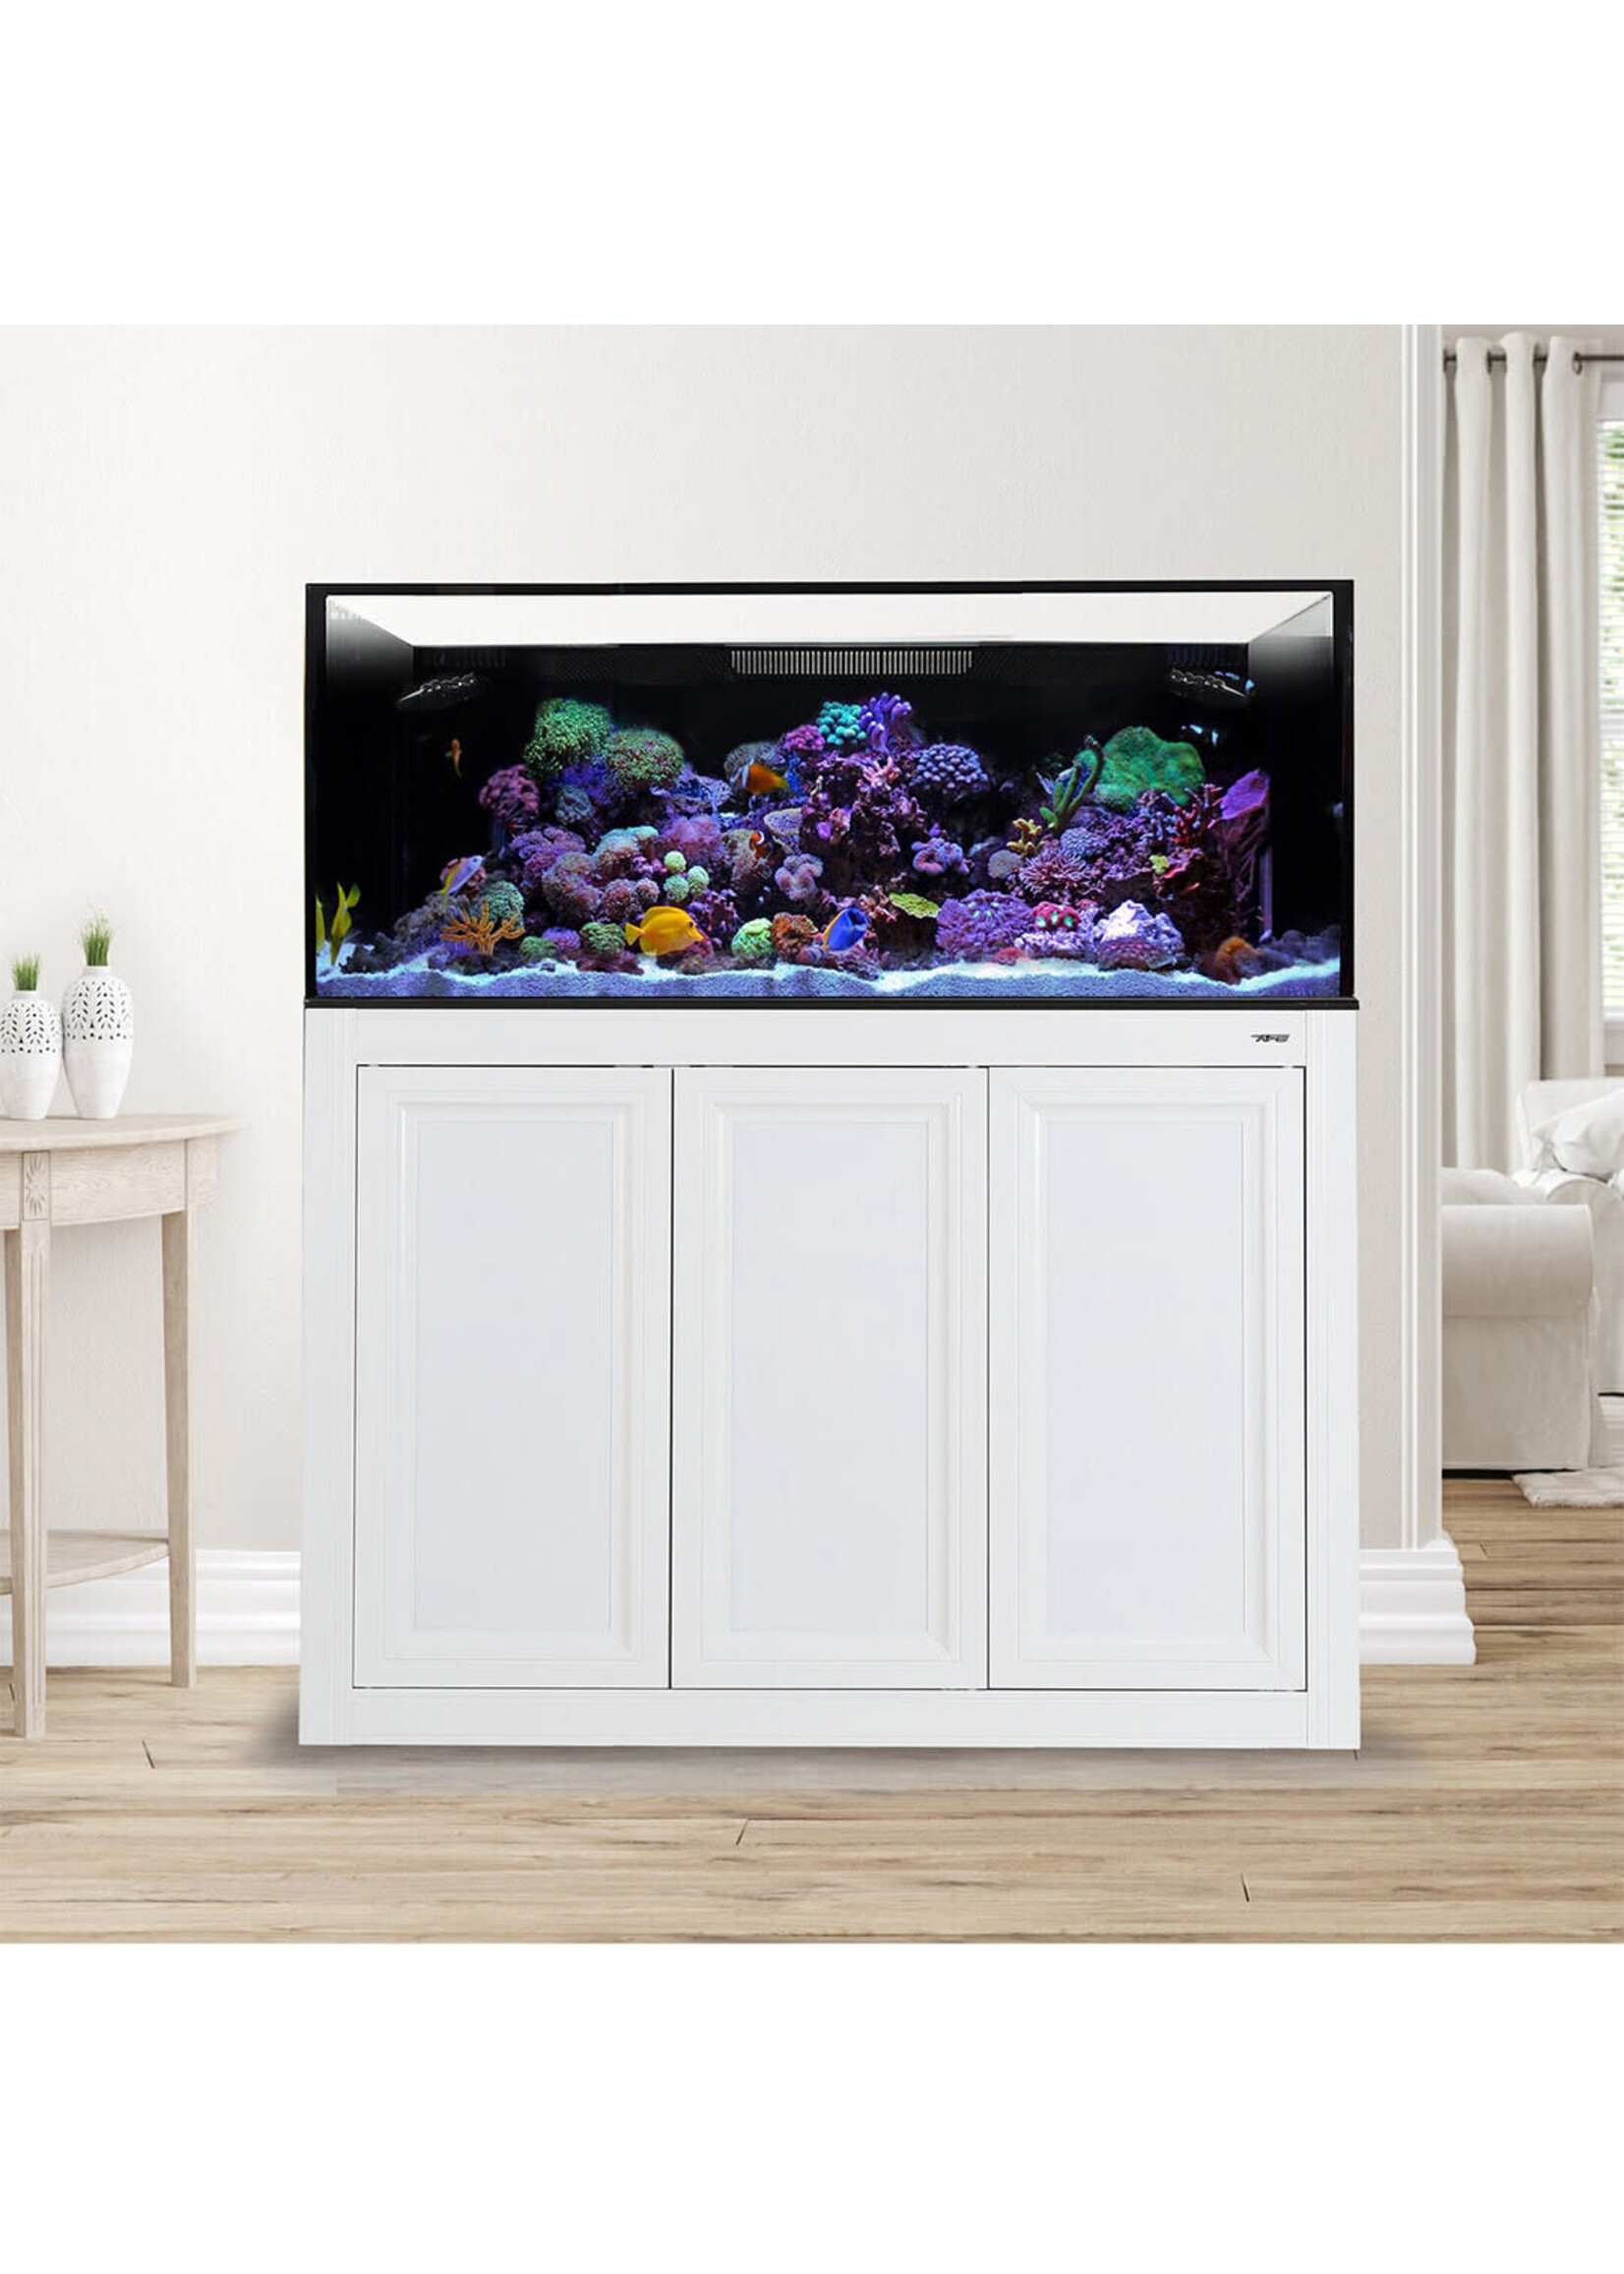 Innovative Marine EXT 150 LAGOON AQUARIUM COMPLETE REEF SYSTEM WHITE (MADE TO ORDER)